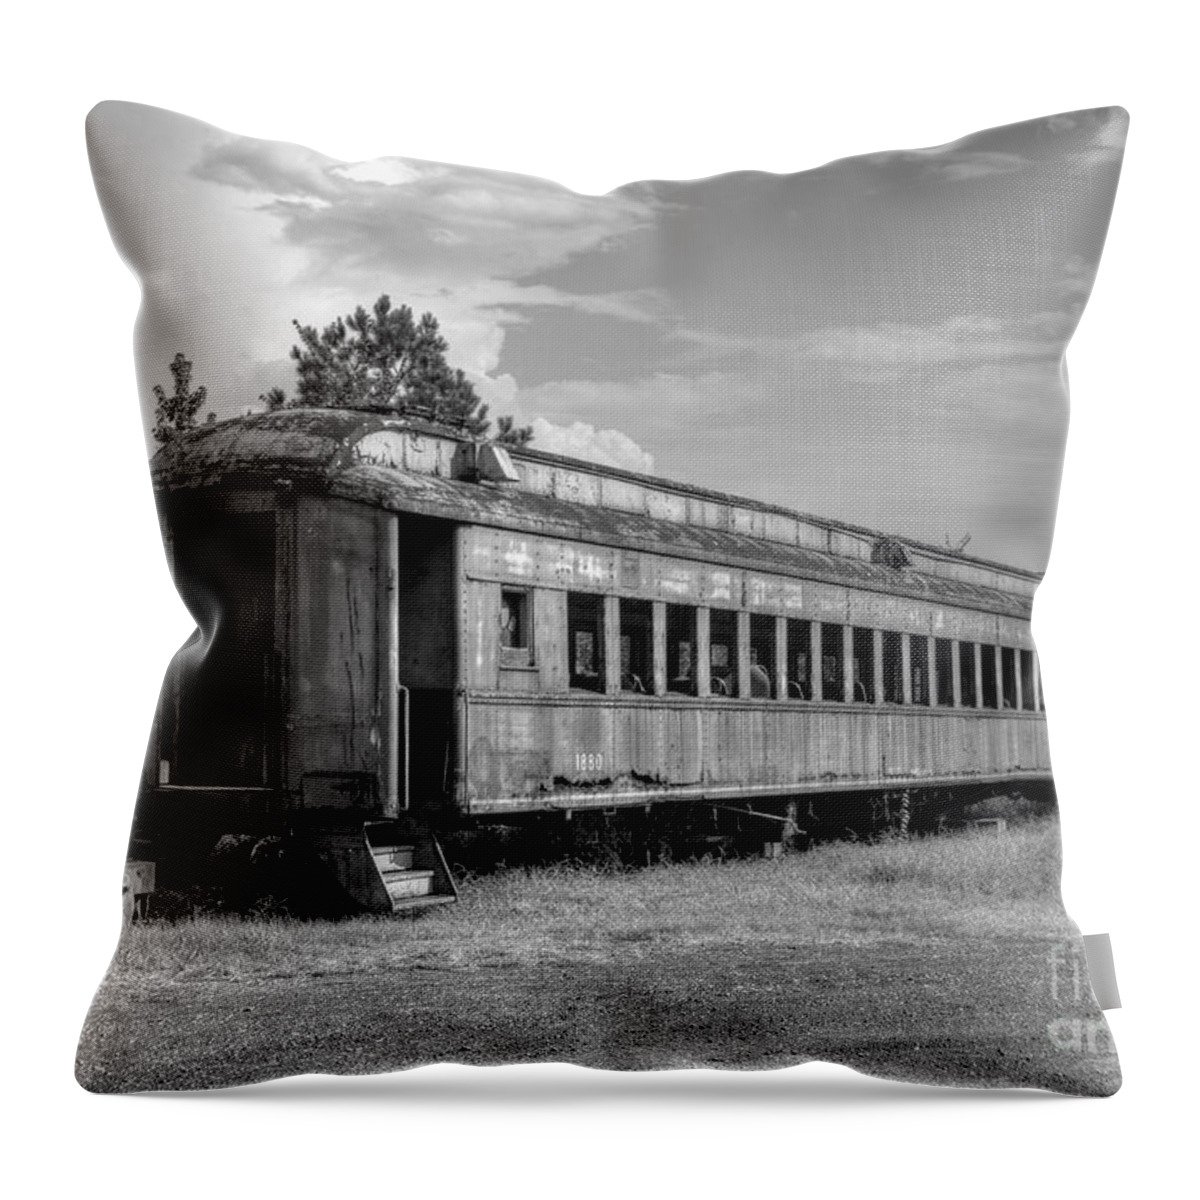 Black And White Throw Pillow featuring the photograph The Old Forgotten Train by Kathy Baccari